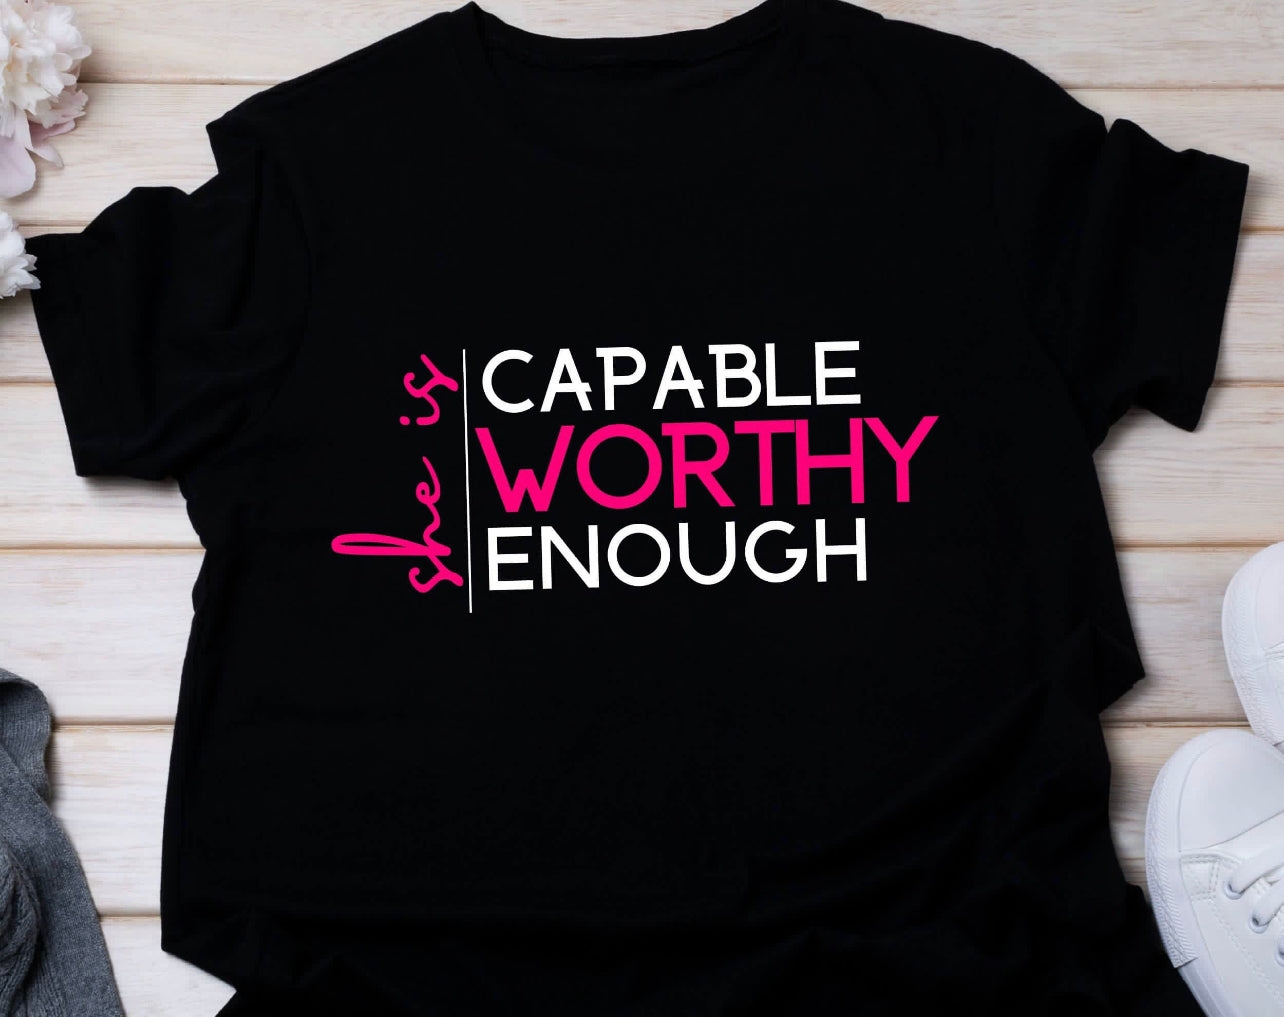 She is Worthy, Capable, and Enough!